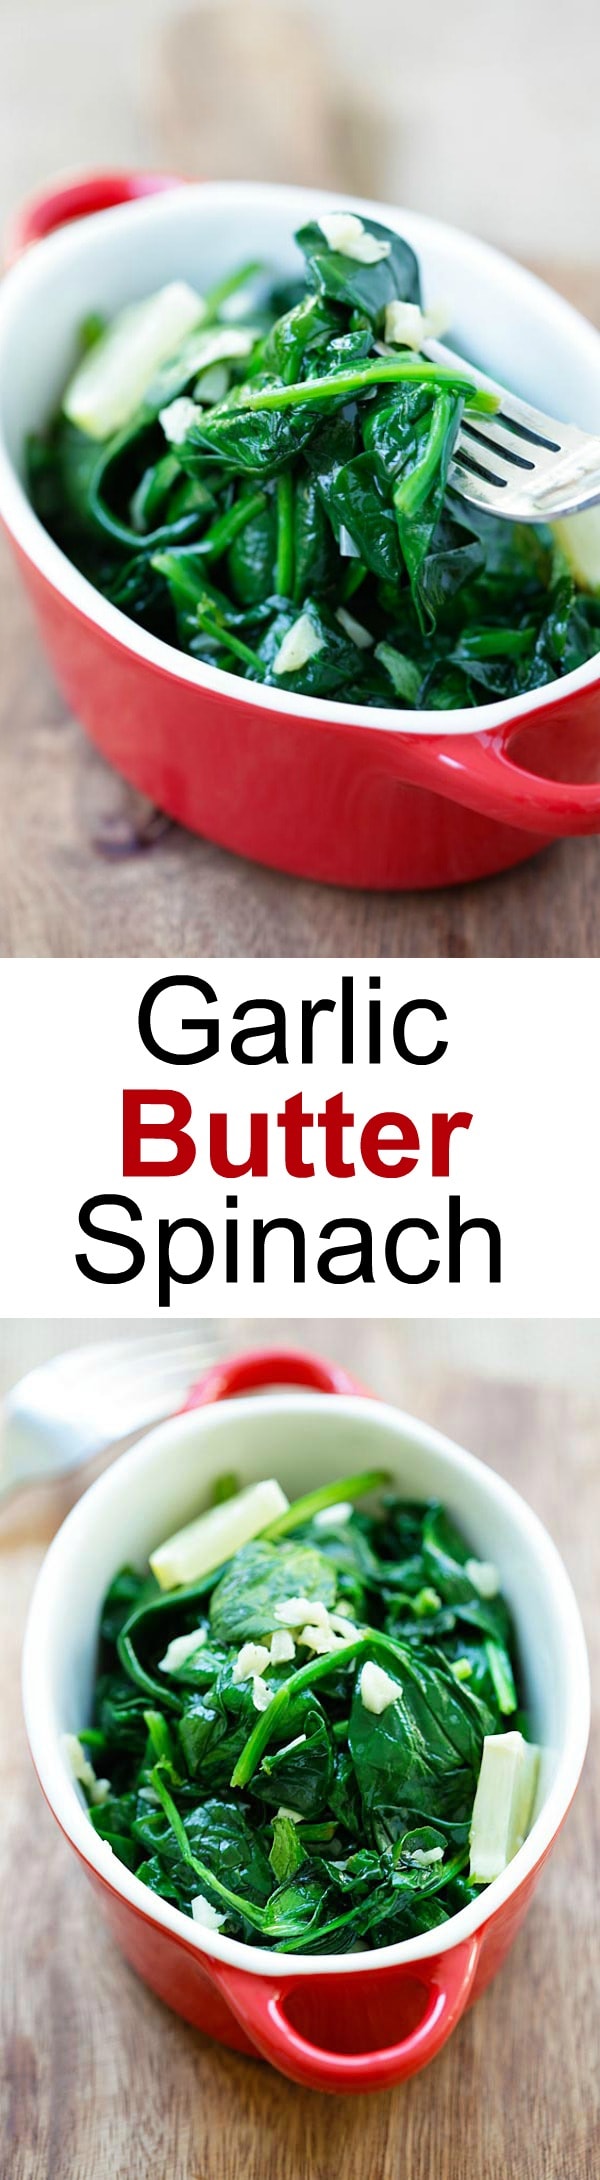 Garlic Butter Sauteed Spinach - easy spinach with garlic and butter. Easy and healthy recipe with only 5 ingredients and takes 8 mins | rasamalaysia.com